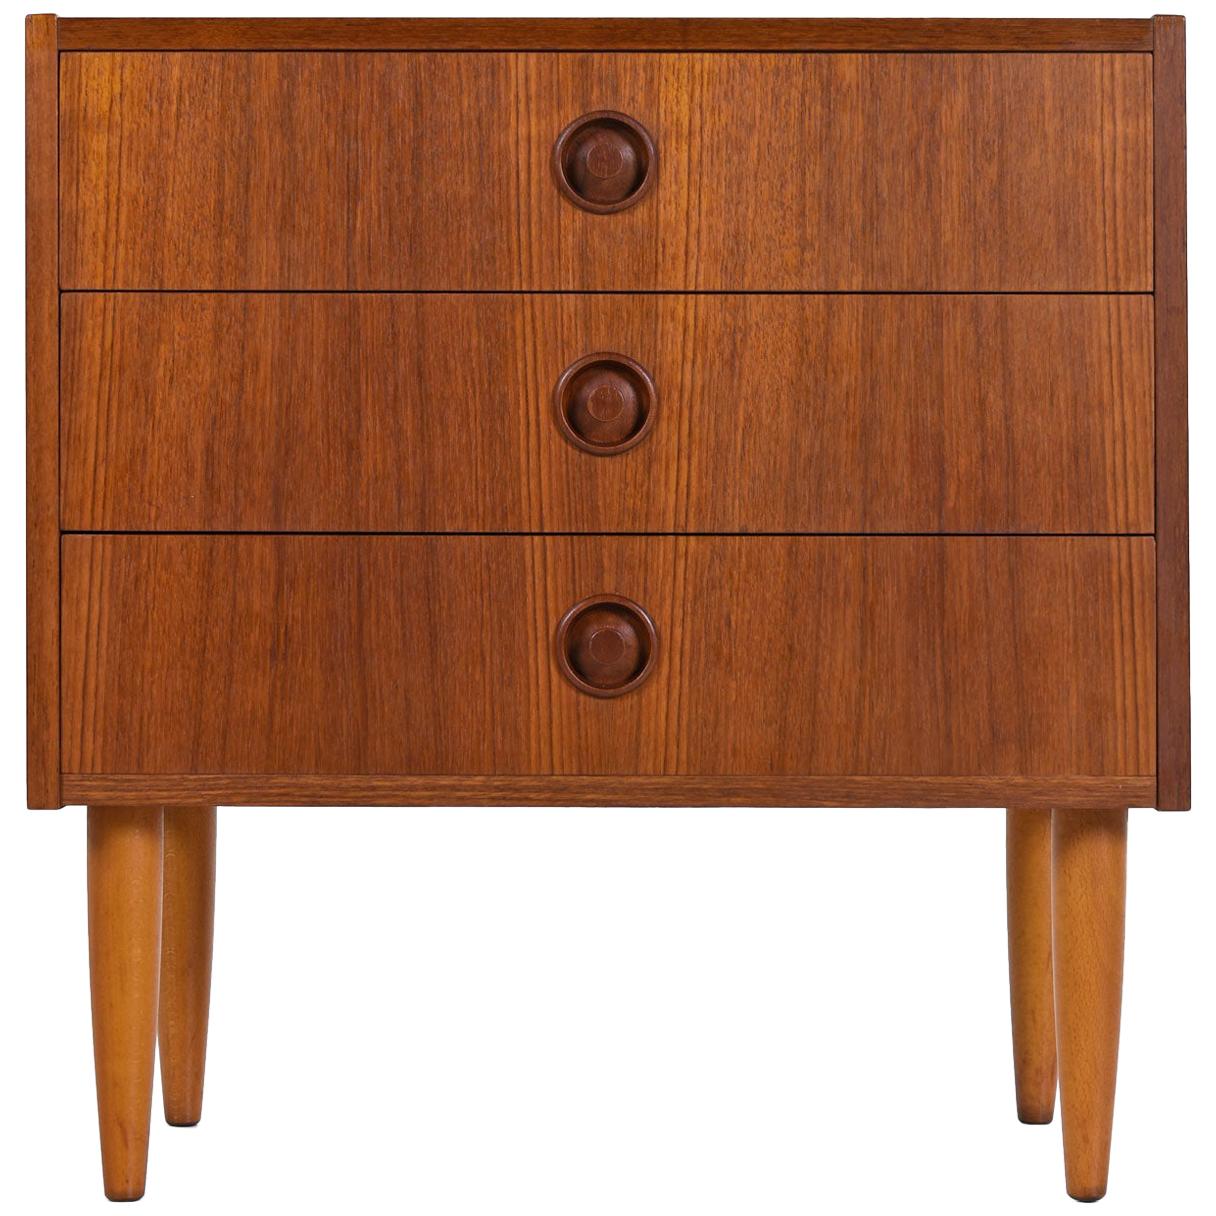 Expertly crafted Mid-Century Modern Danish teak nightstand or bachelors chest of drawers. Three stacked drawers with radio knob style pulls carved from dark tone contrasting solid teak.